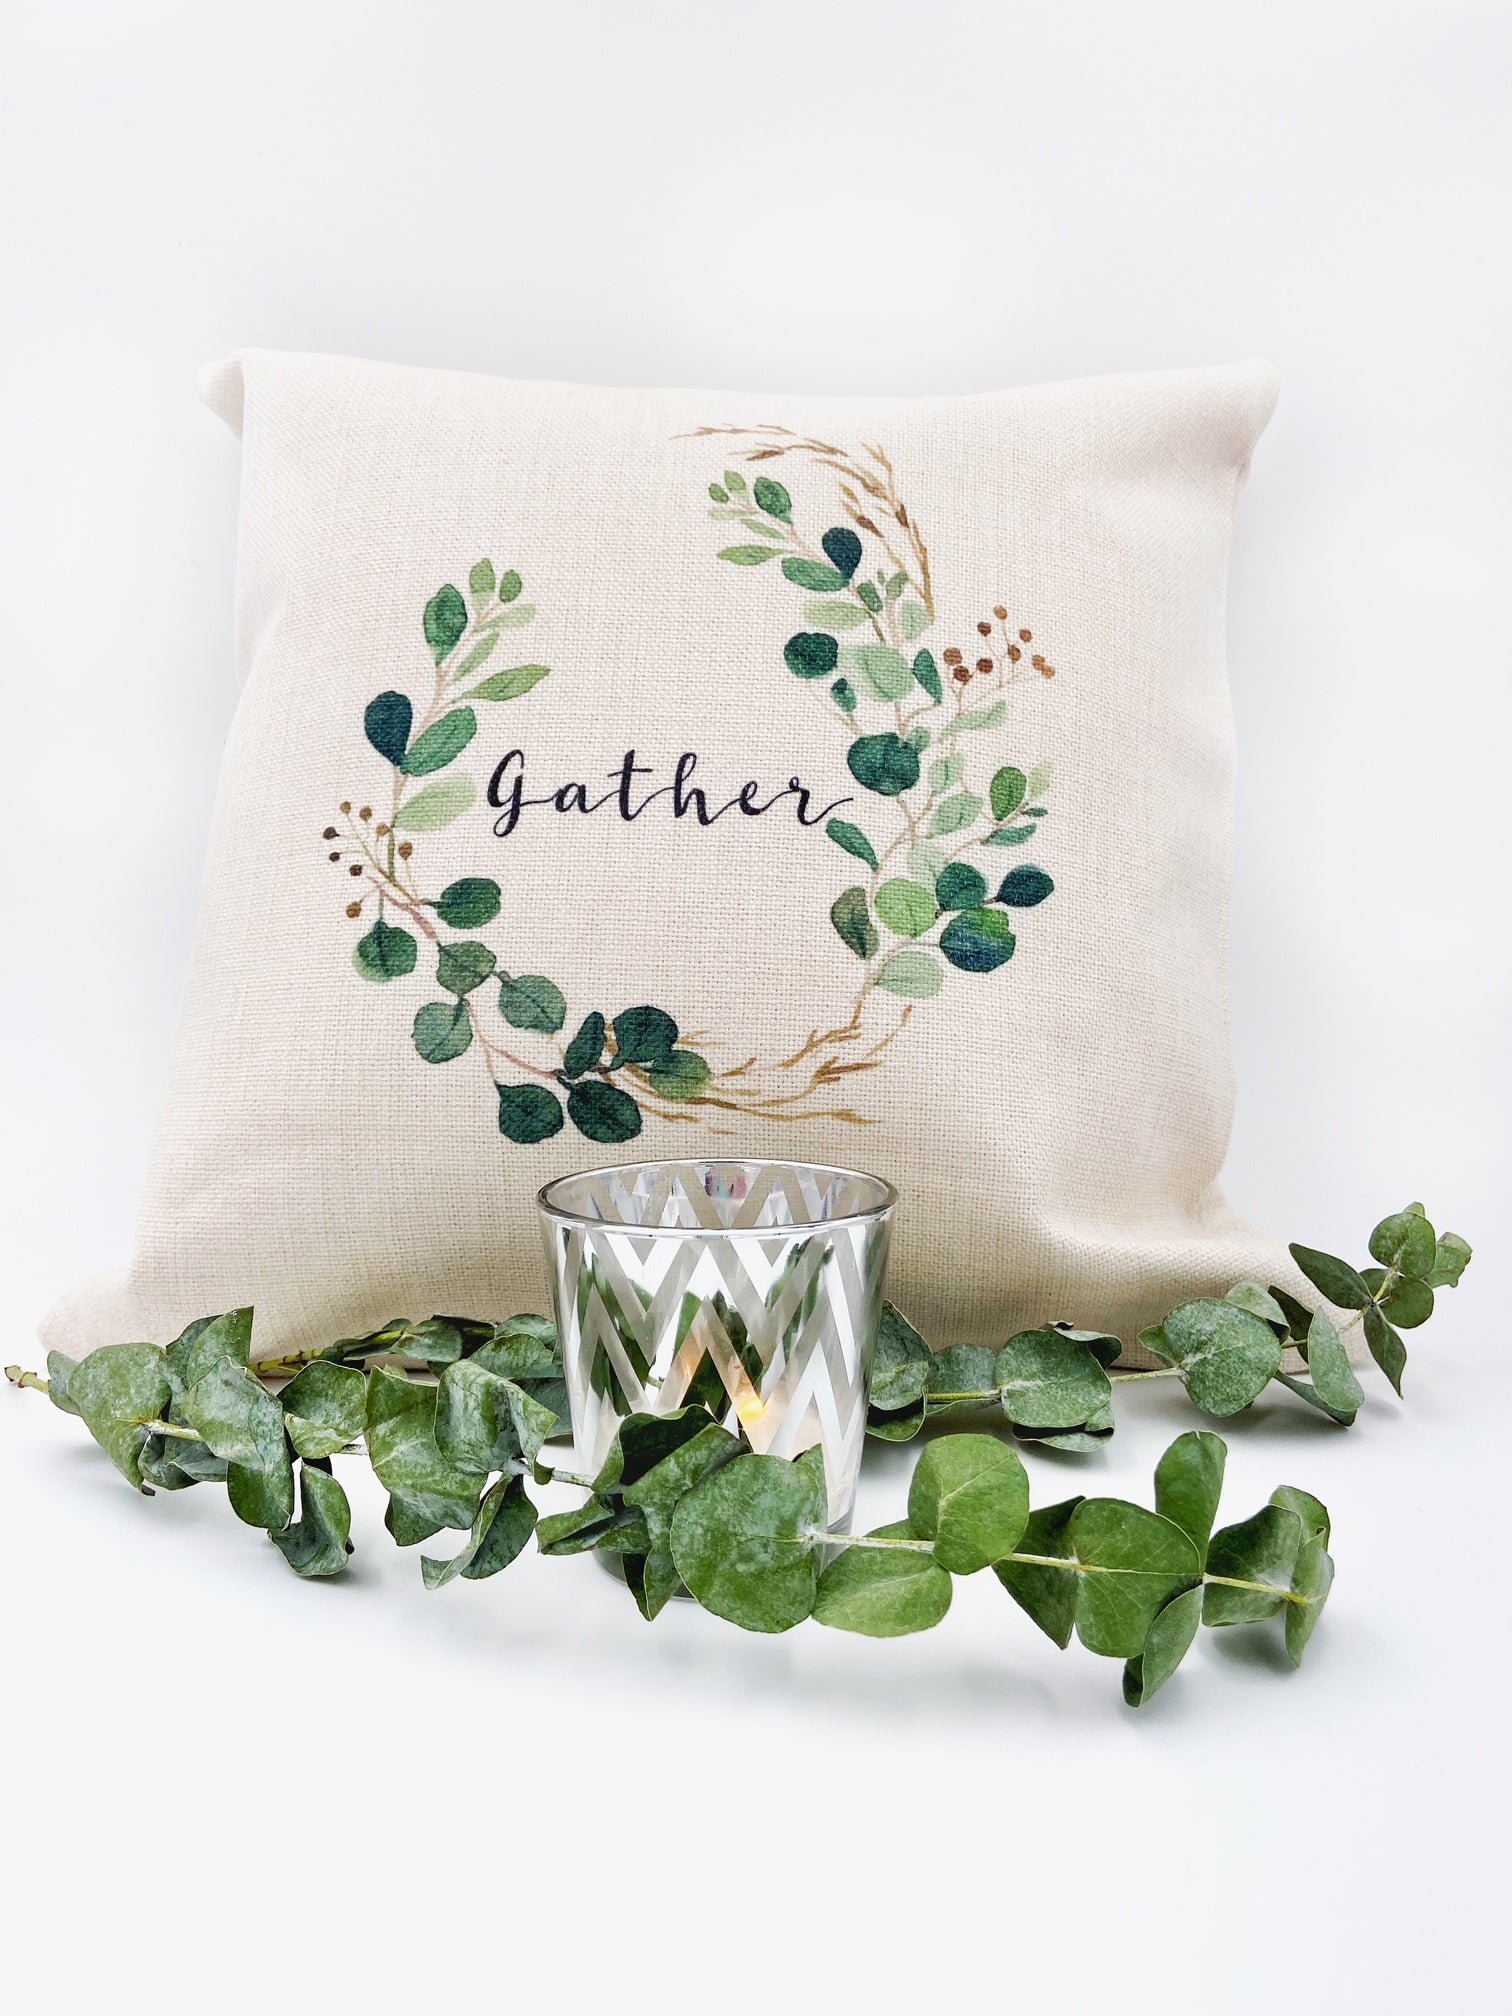 Gather Pillow Cover - Salt and Branch